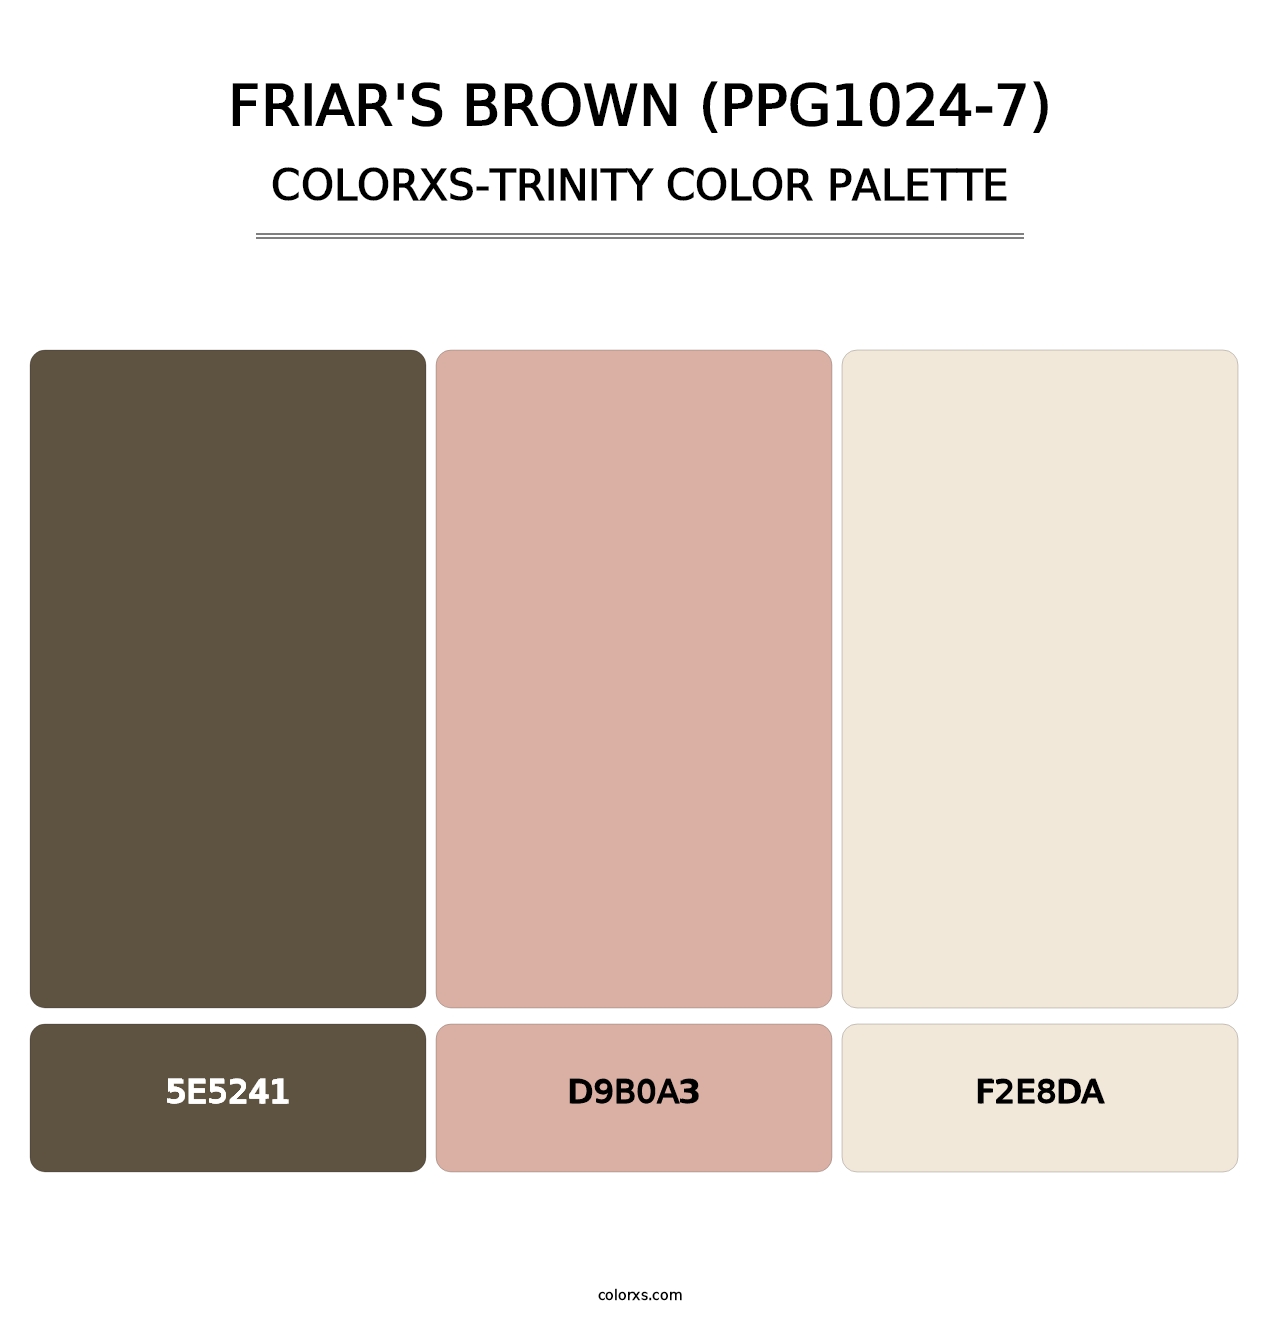 Friar's Brown (PPG1024-7) - Colorxs Trinity Palette